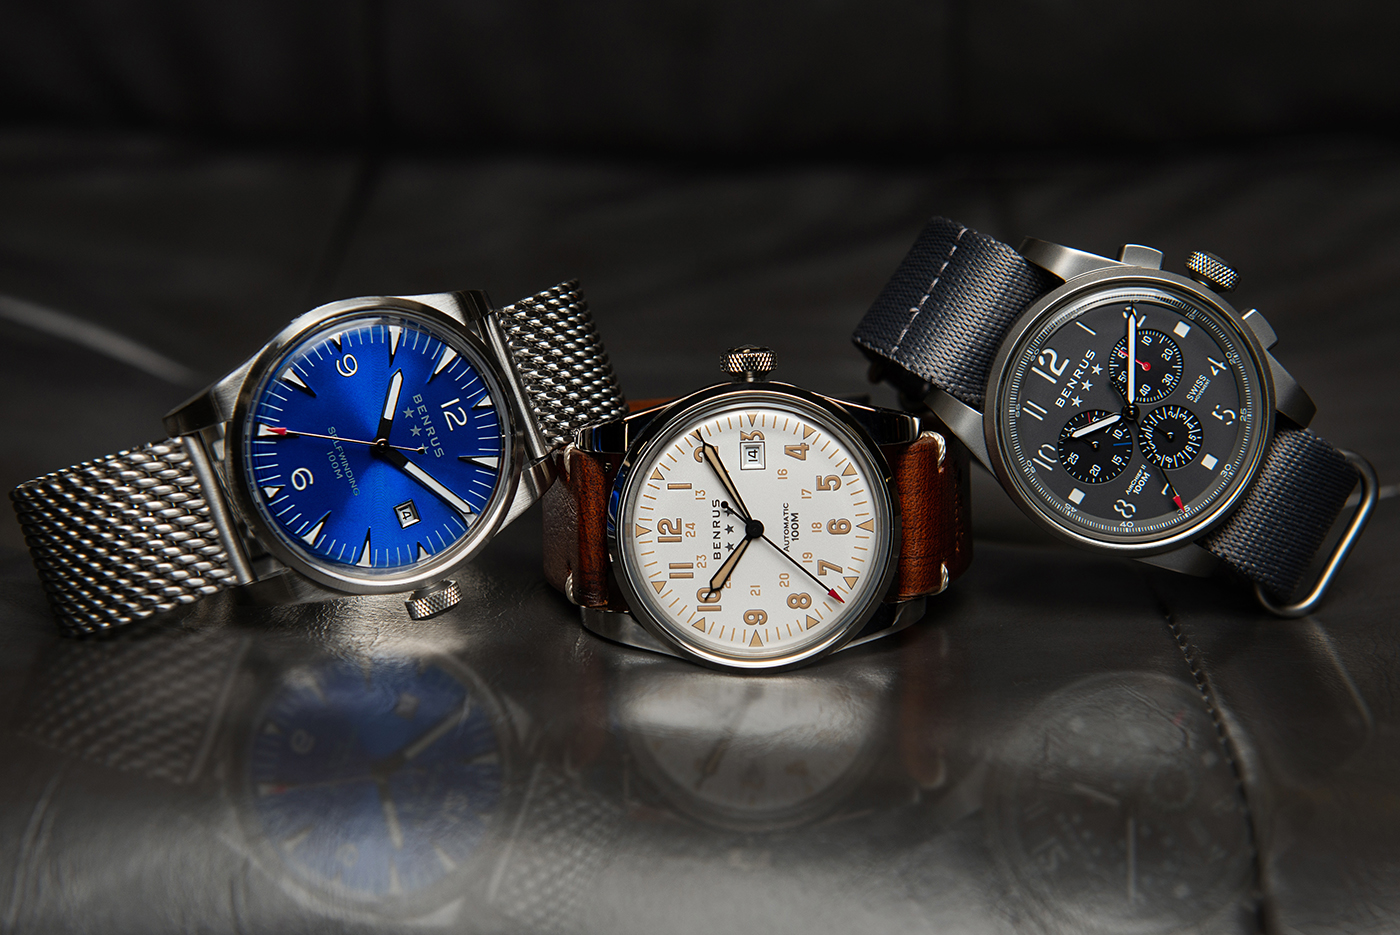 American Watchmaker Benrus Relaunches With Three New Models Watch Releases 